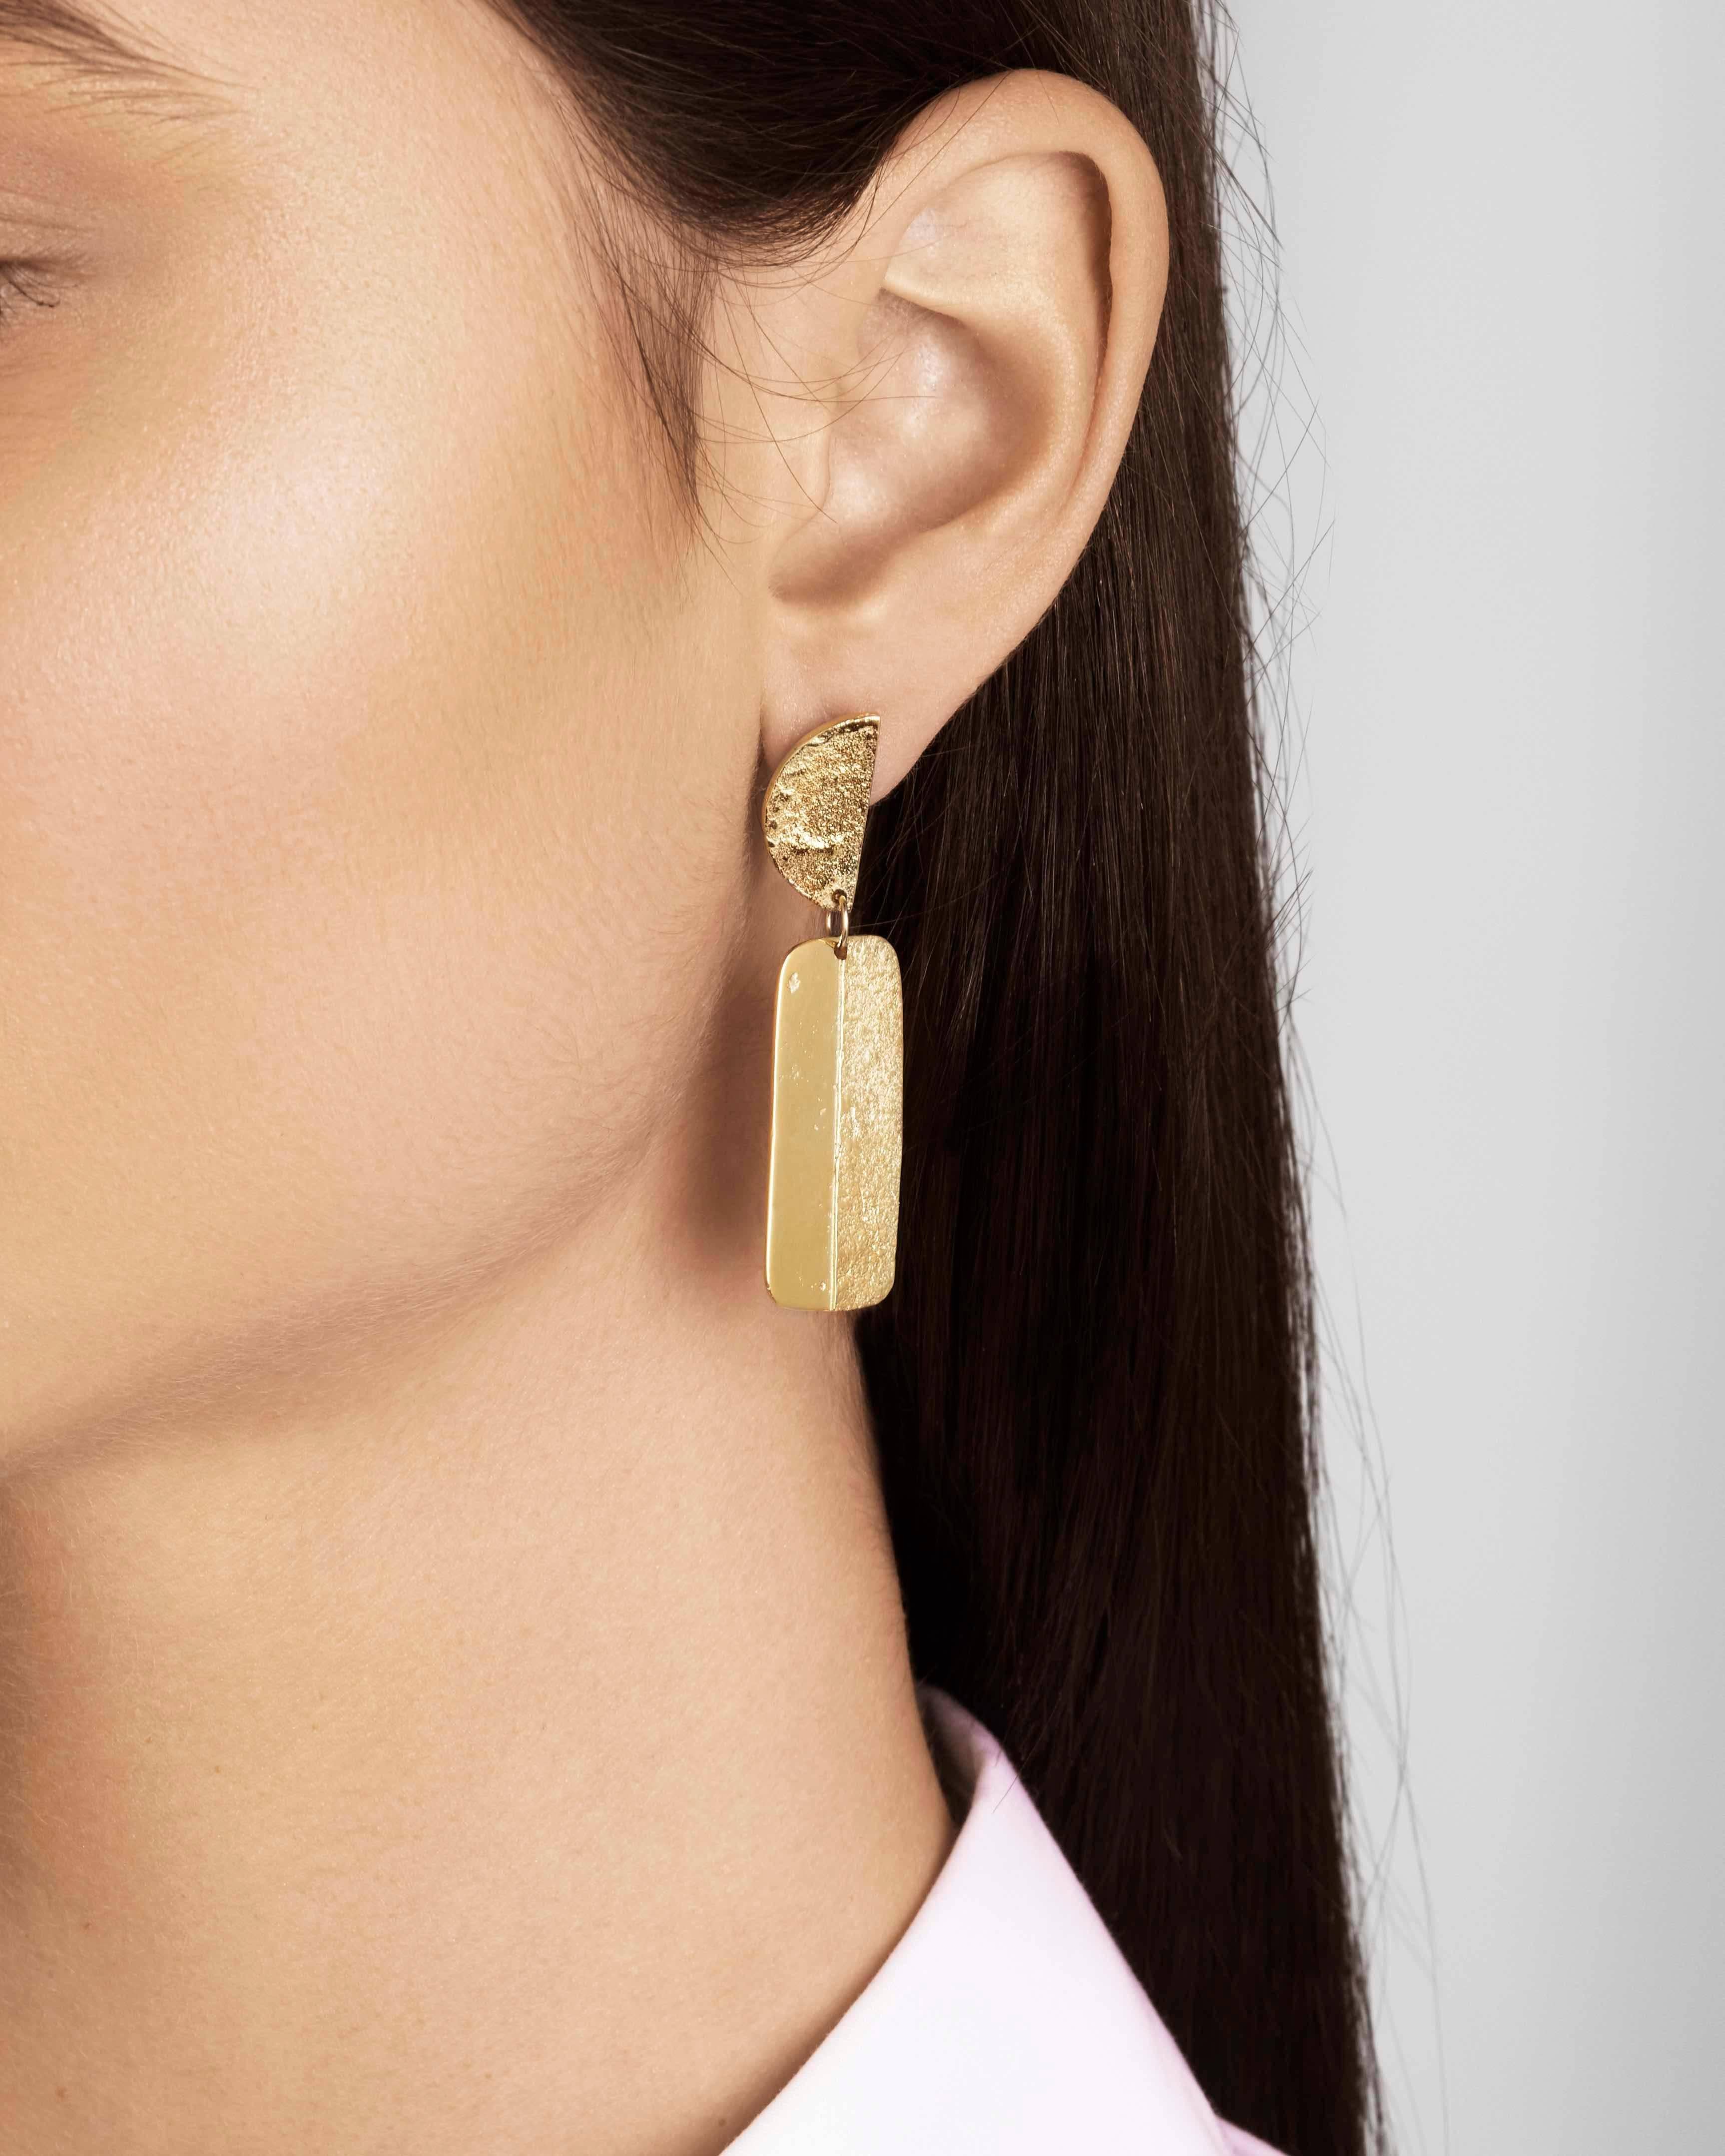 Articulated statement earrings with a combination of shimmering texture and a rustic high-polish finish. In 18-carat gold-plated sterling silver with a post and butterfly closure.  Earrings measure approximately 1.4 cm wide by 5 cm long. 

Handmade